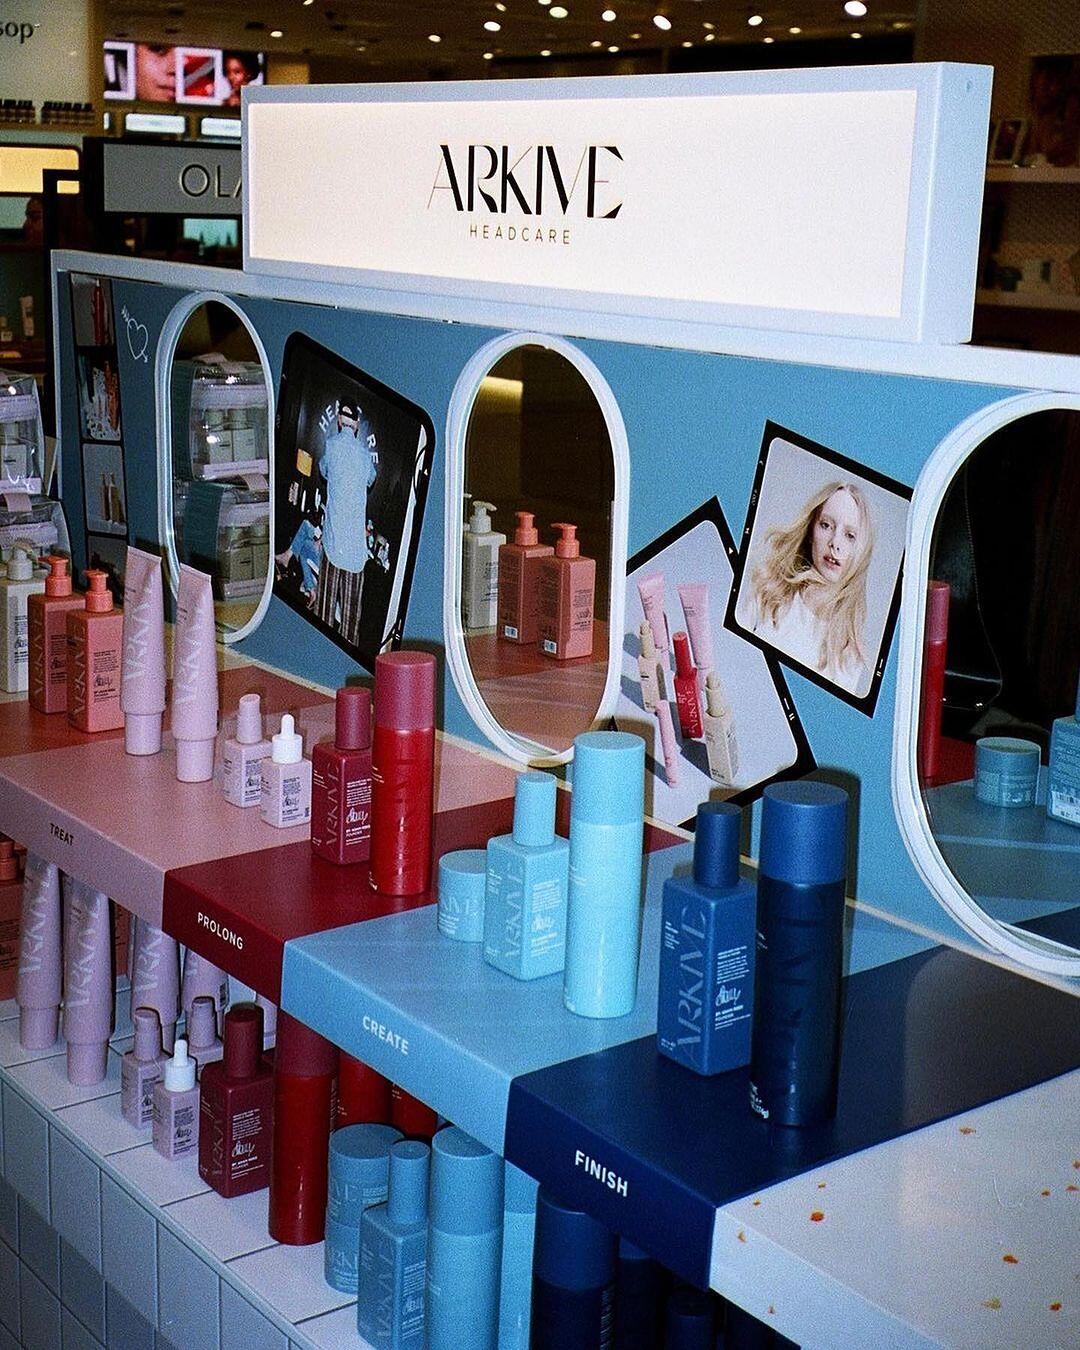 Adam Reed’s Headcare Brand ARKIVE Launches into Leading Retailer, Selfridges with Help of Accessories Brand, ROOP